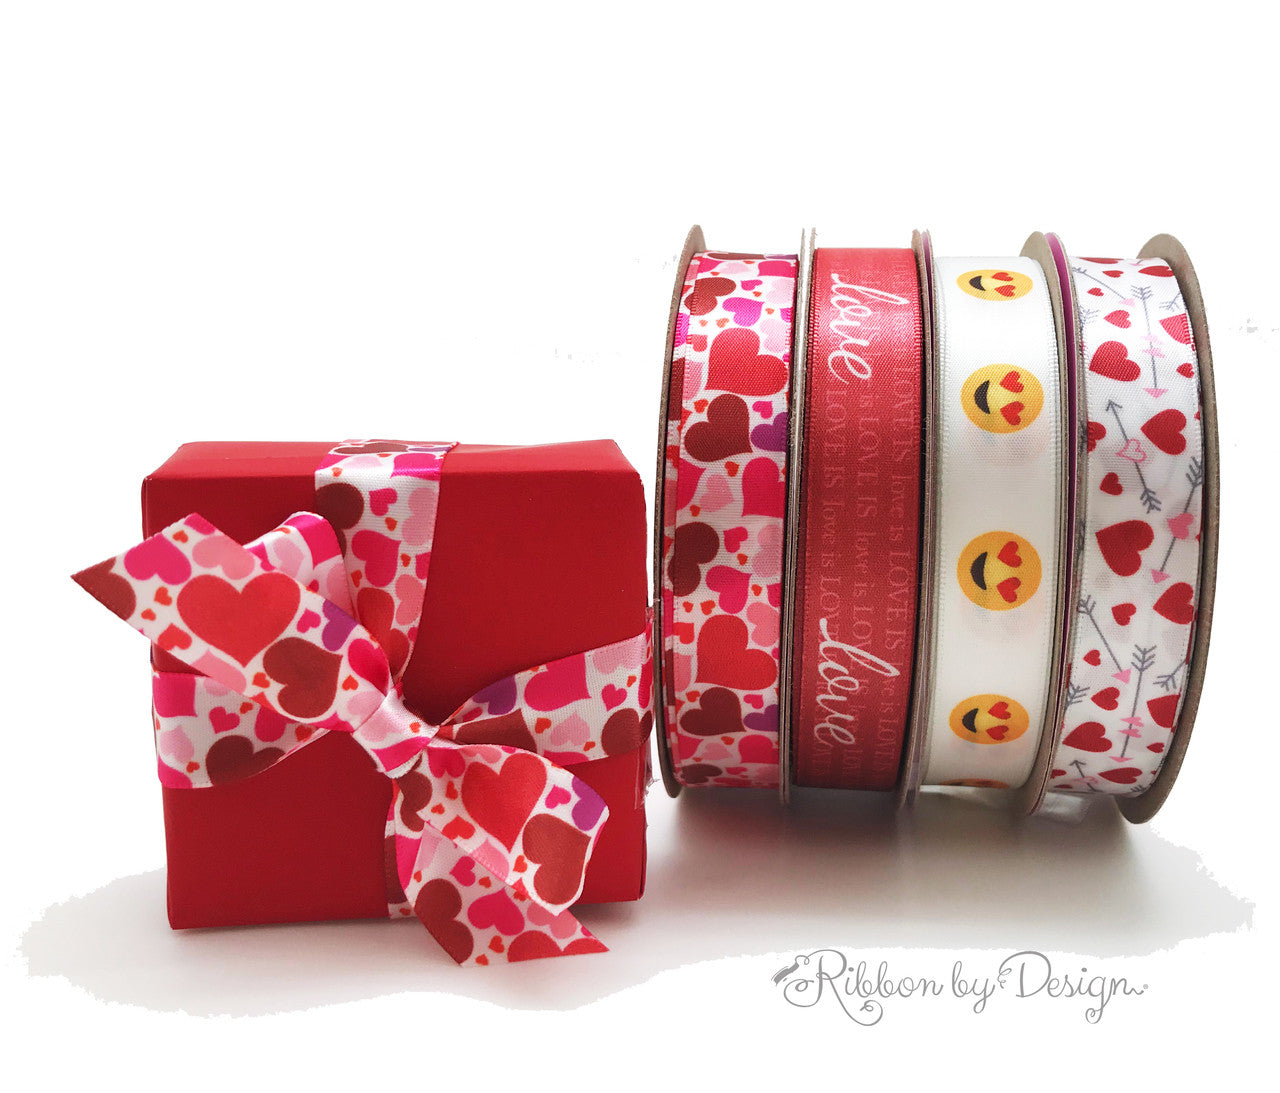 Love is Ribbon printed on 5/8" white single face satin